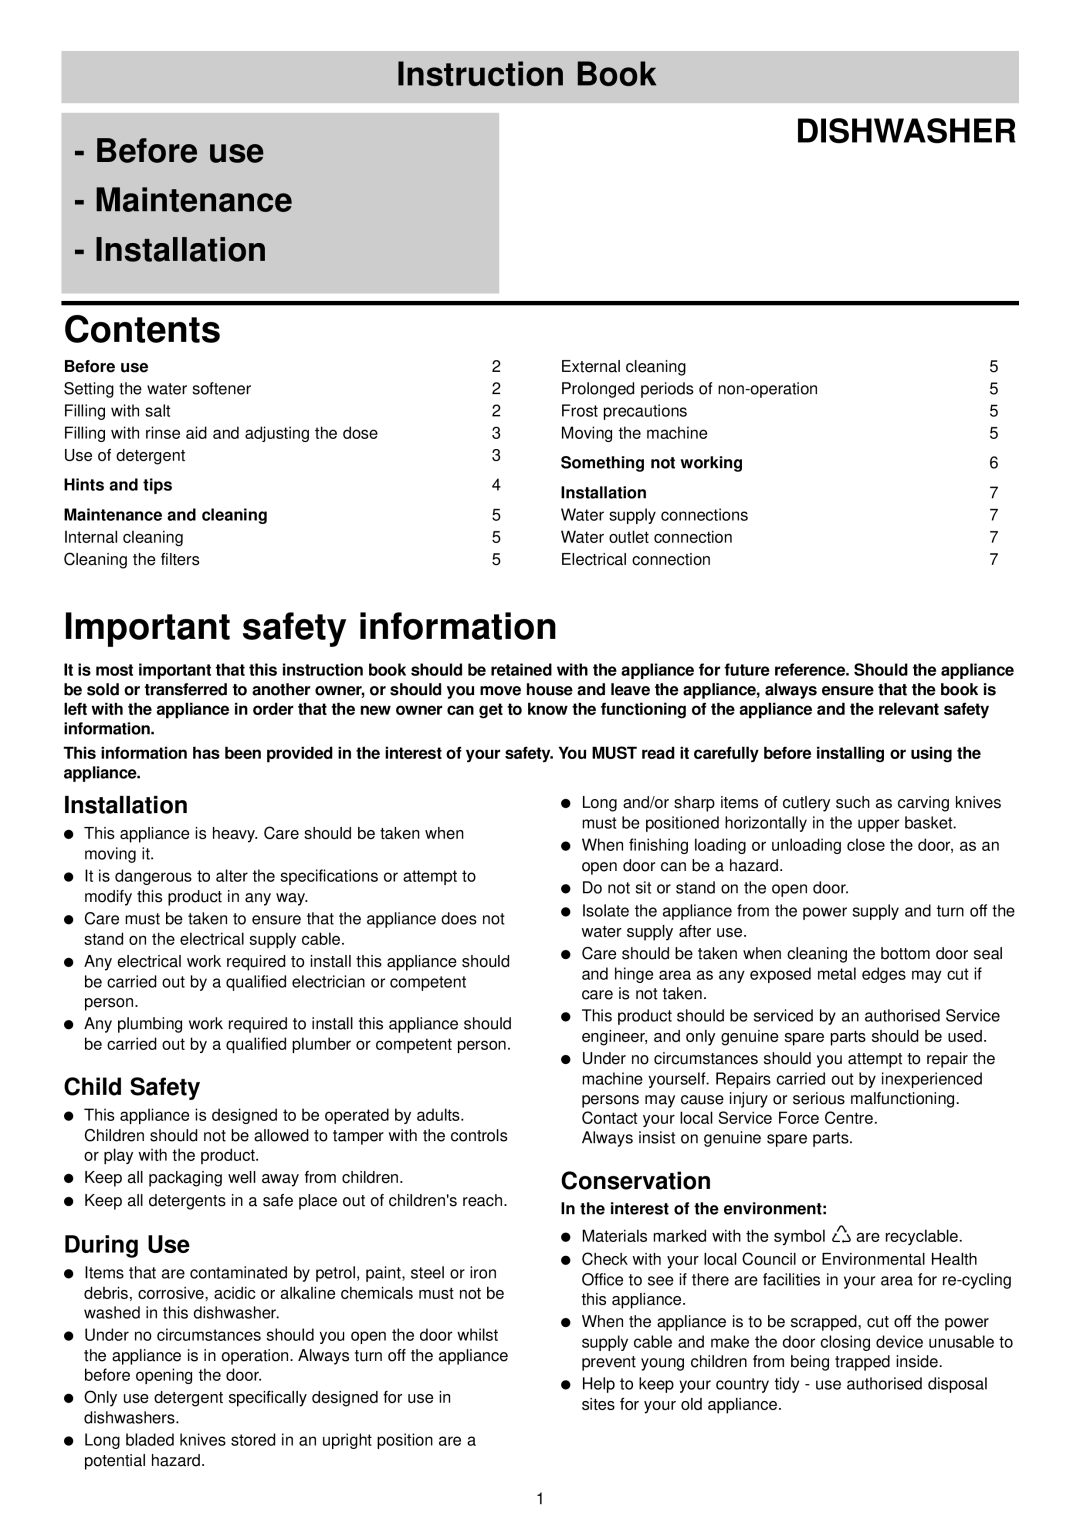 Zanussi ZDT 6253 Contents, Important safety information, Installation, Child Safety, During Use, Conservation, Dishwasher 